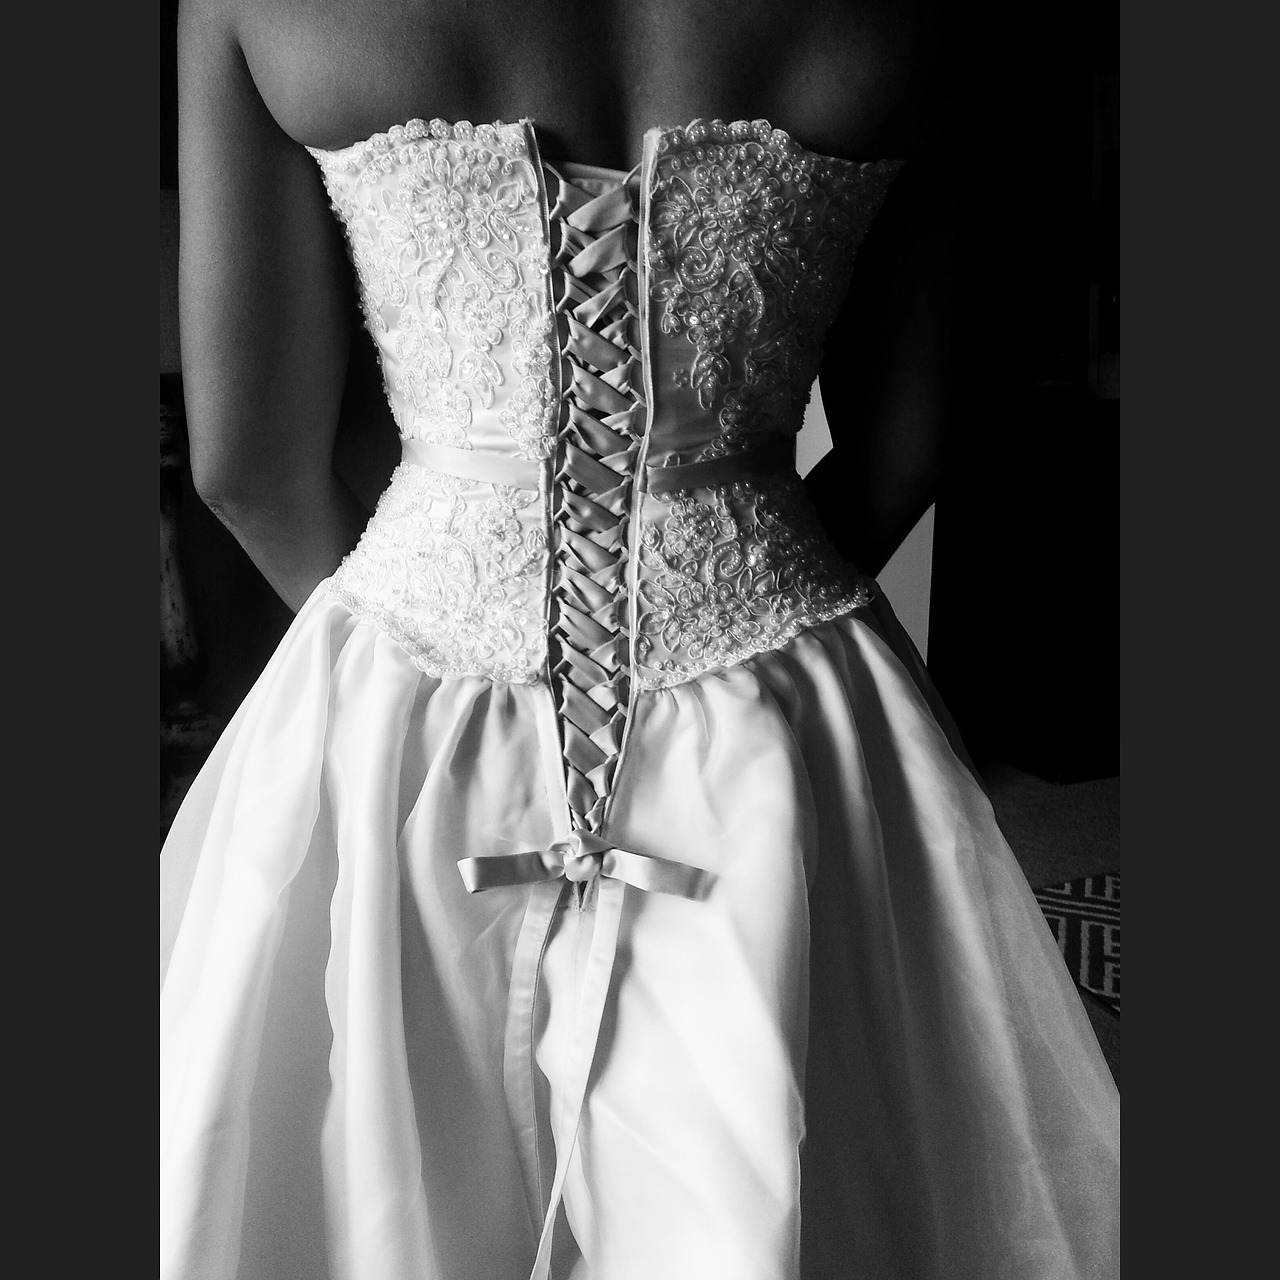 The back of a wedding dress.